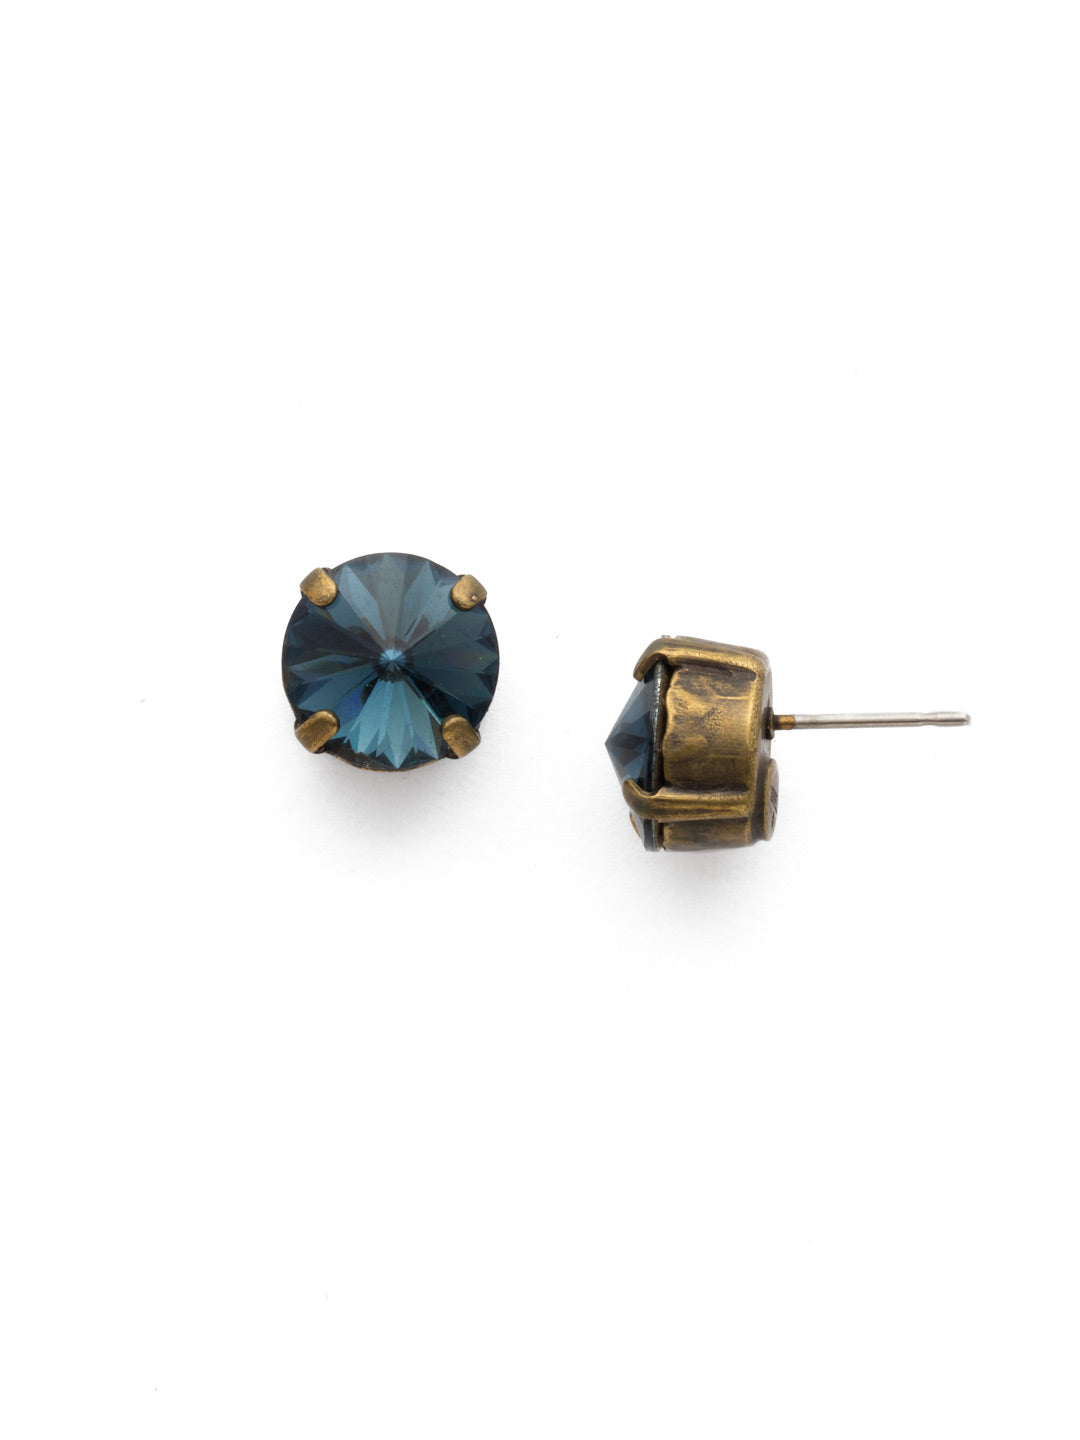 London Stud Earrings - ECM14AGMON - <p>Everyone needs a great pair of studs. Add some classic sparkle to any occasion with these stud earrings. Need help picking a stud? <a href="https://www.sorrelli.com/blogs/sisterhood/round-stud-earrings-101-a-rundown-of-sizes-styles-and-sparkle">Check out our size guide!</a> From Sorrelli's Montana collection in our Antique Gold-tone finish.</p>